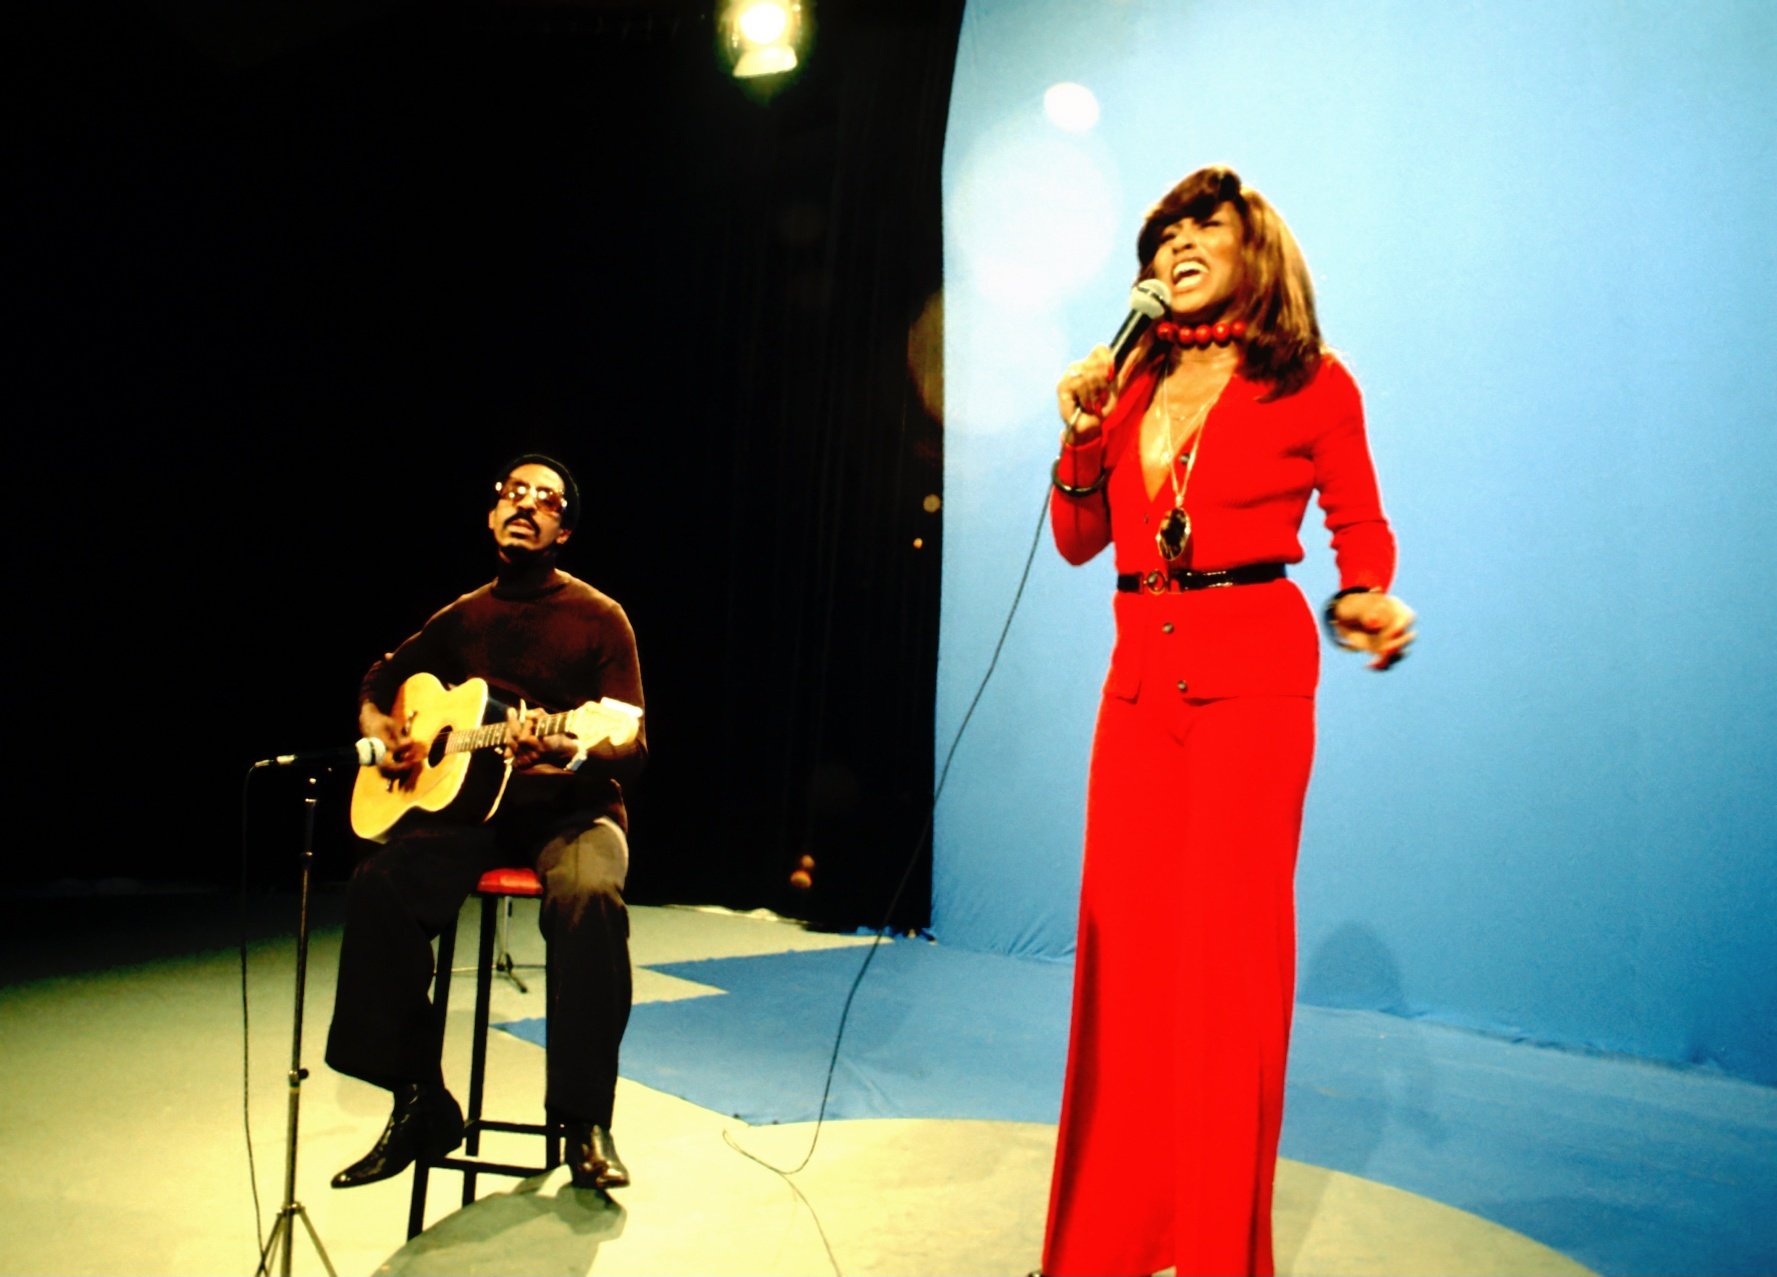 Tina Turner sings in a red dress while Ike Turner sits and plays guitar